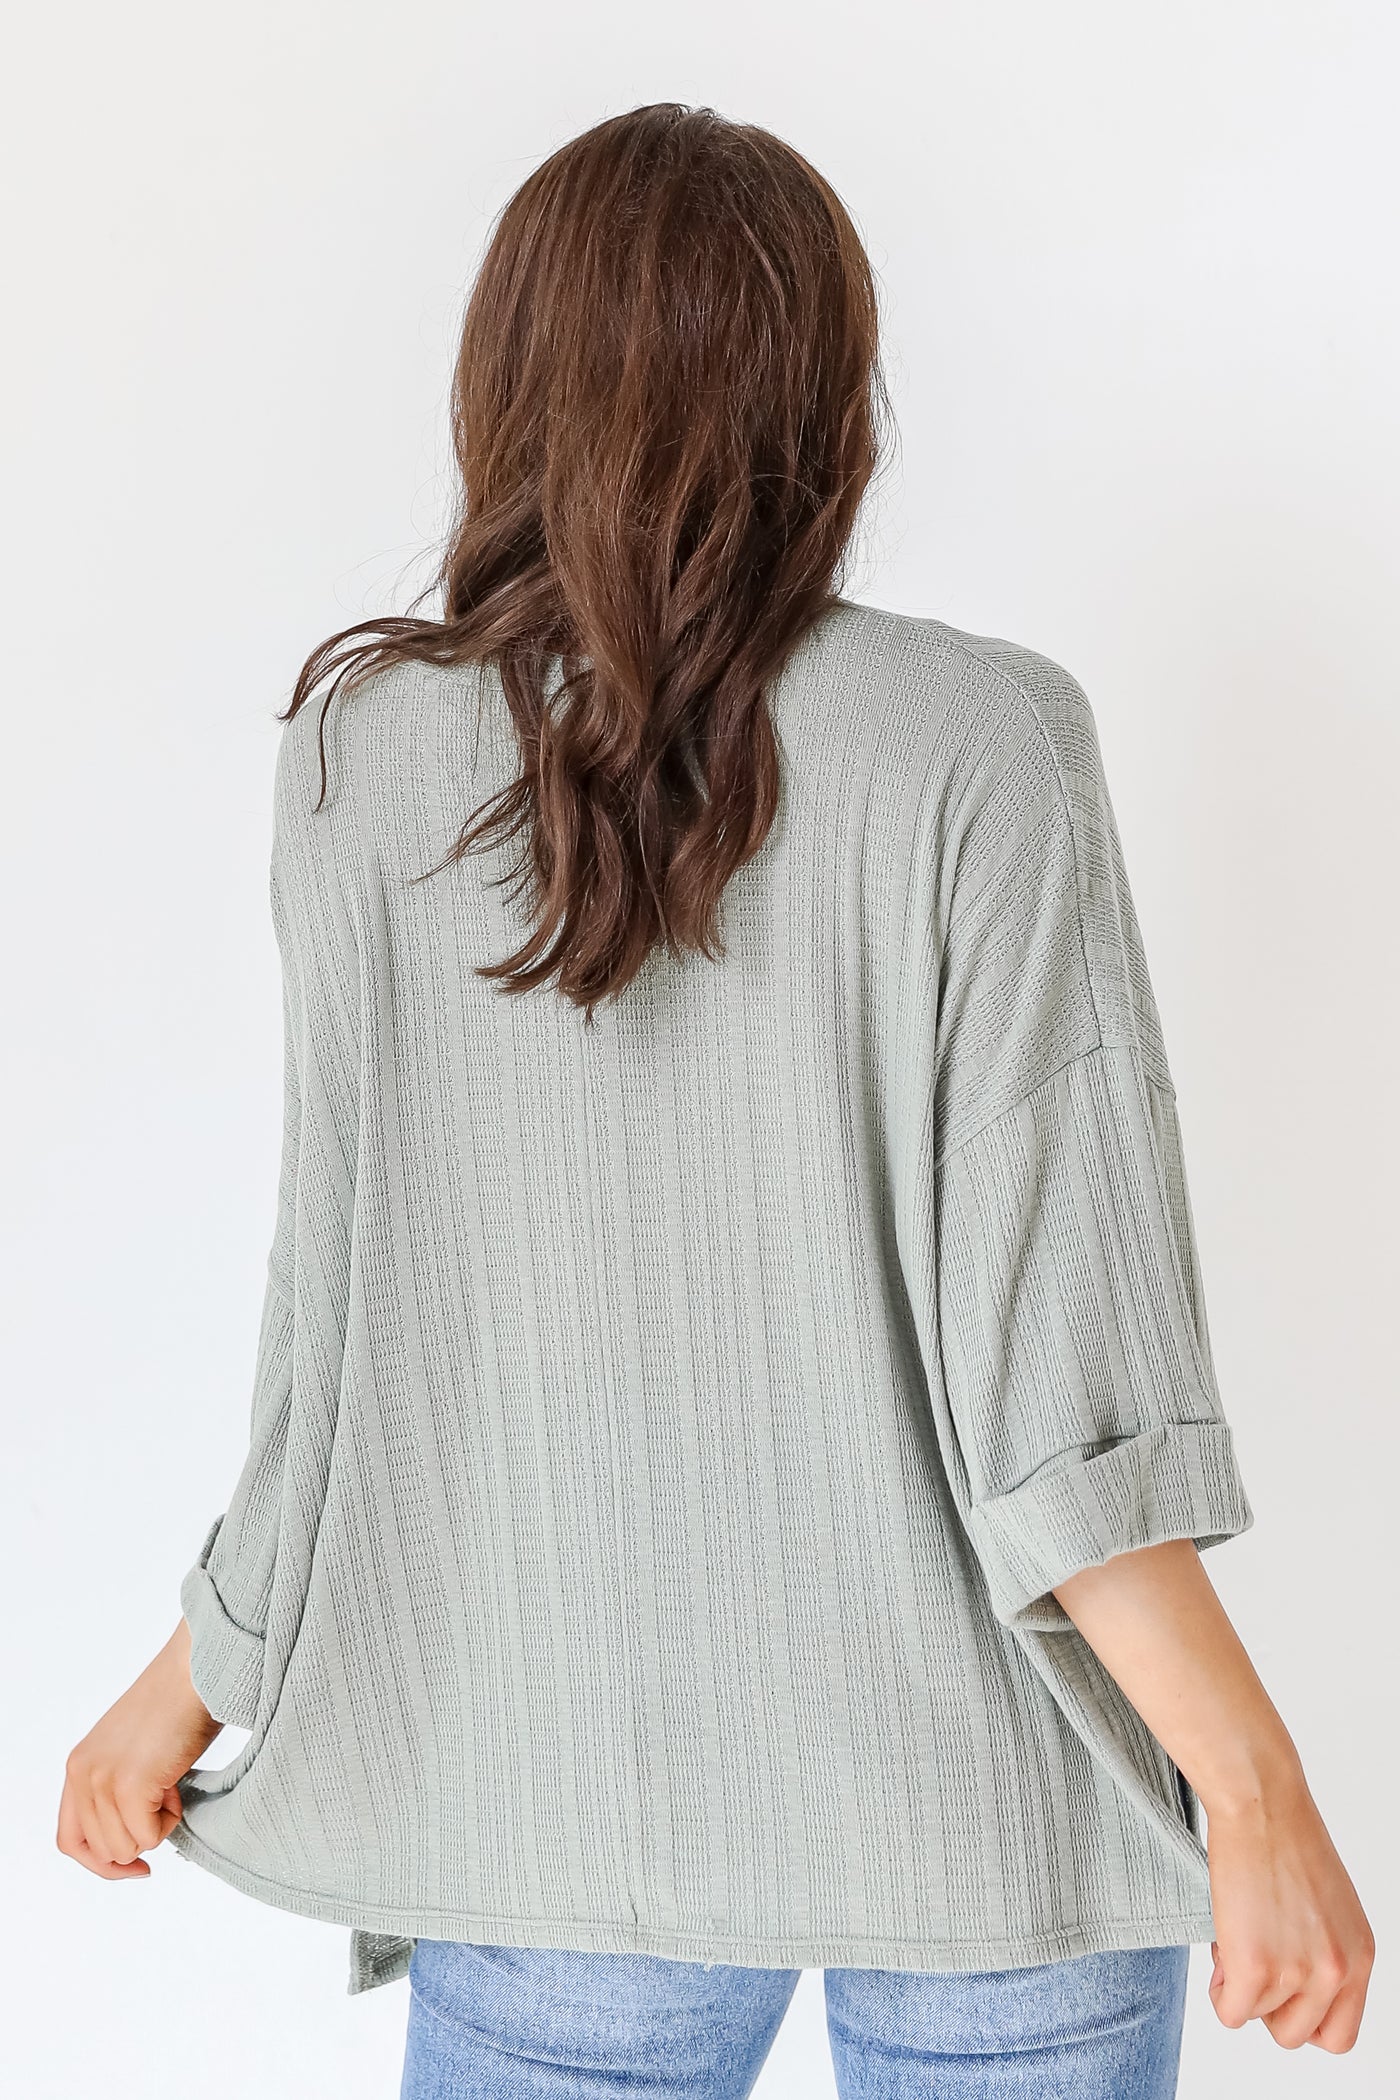 Knit Top in sage back view